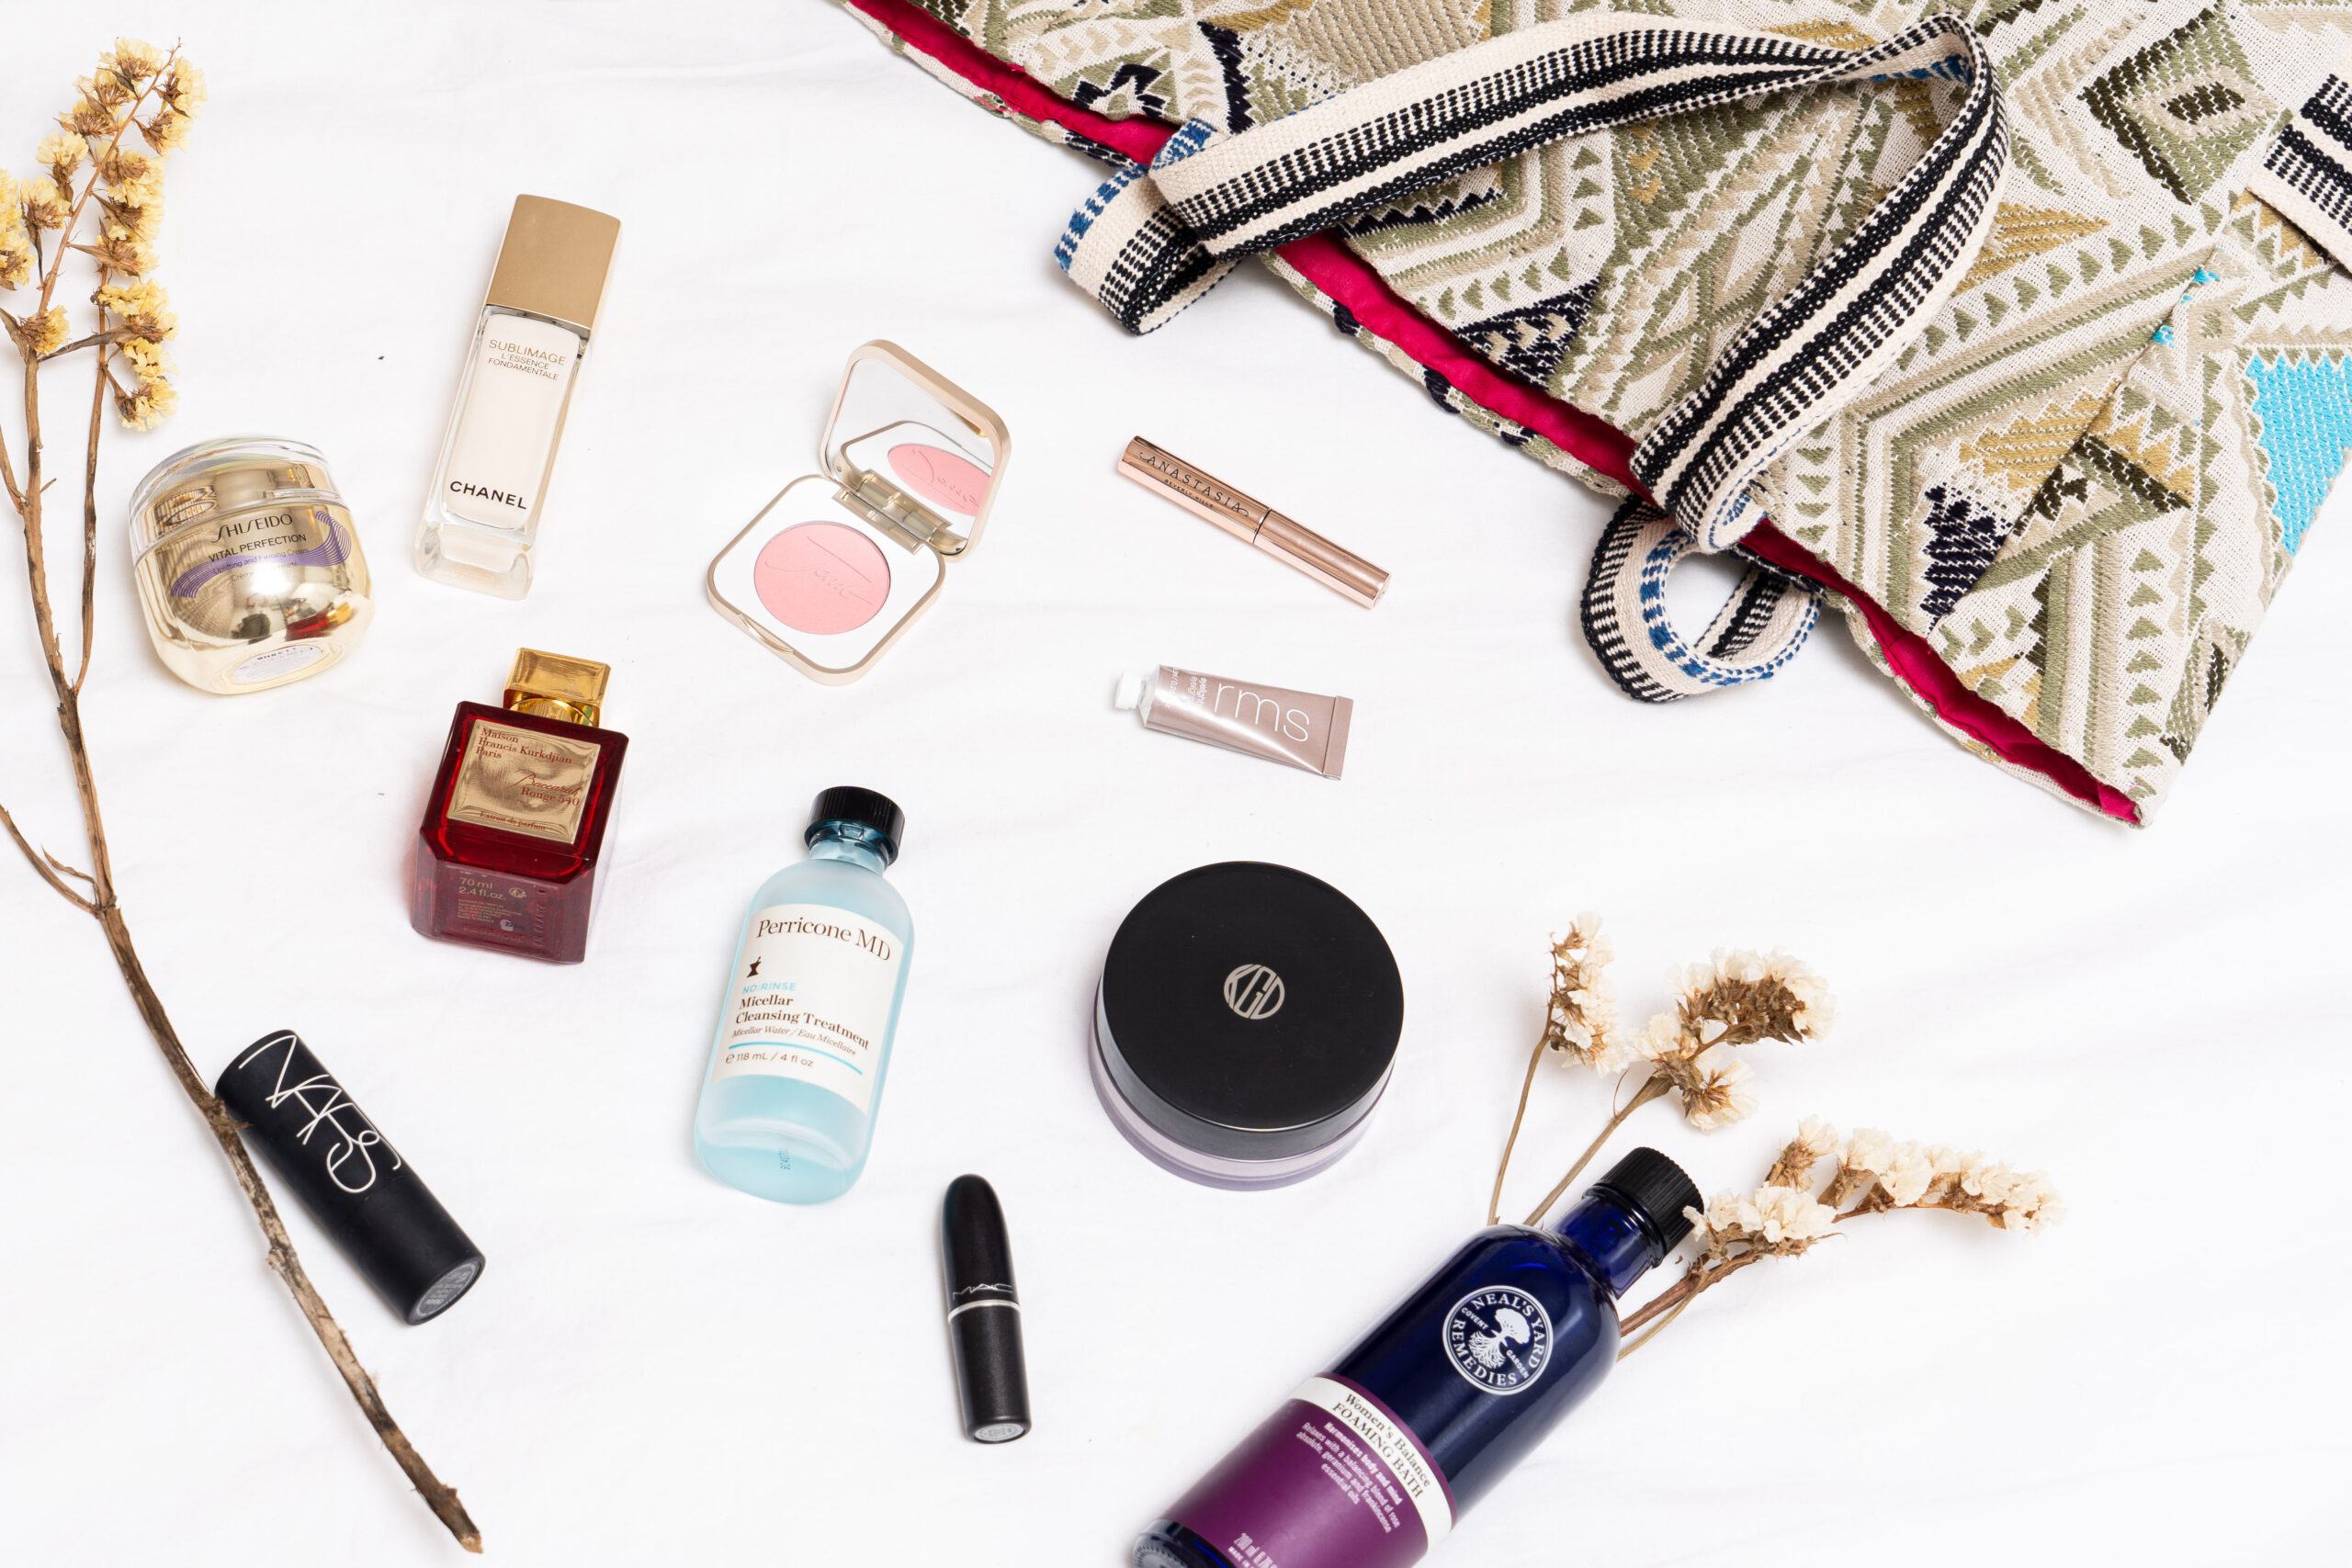 Get Summer Ready With These Shopping Tips and Beauty Picks From Rustan’s the Beauty Source